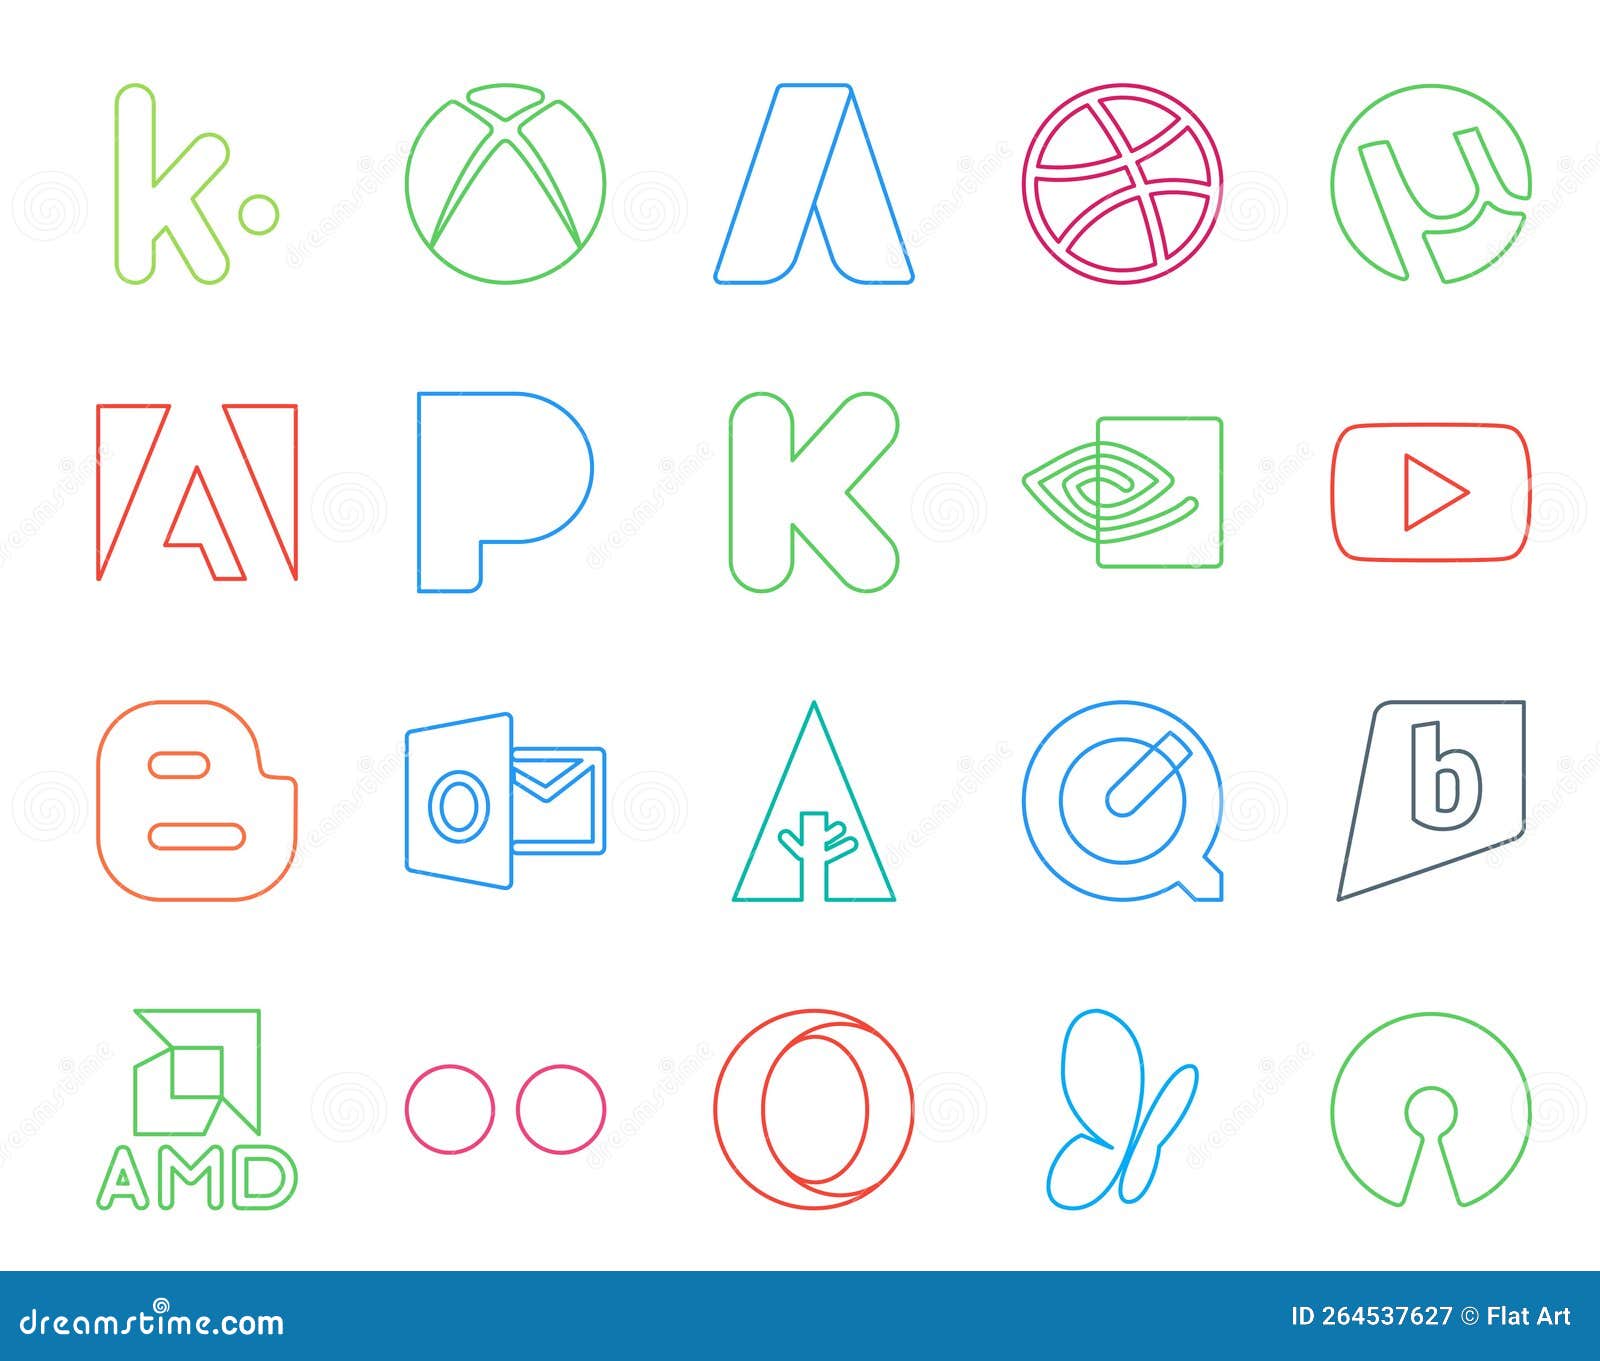 20 social media icon pack including flickr. brightkite. nvidia. quicktime. outlook